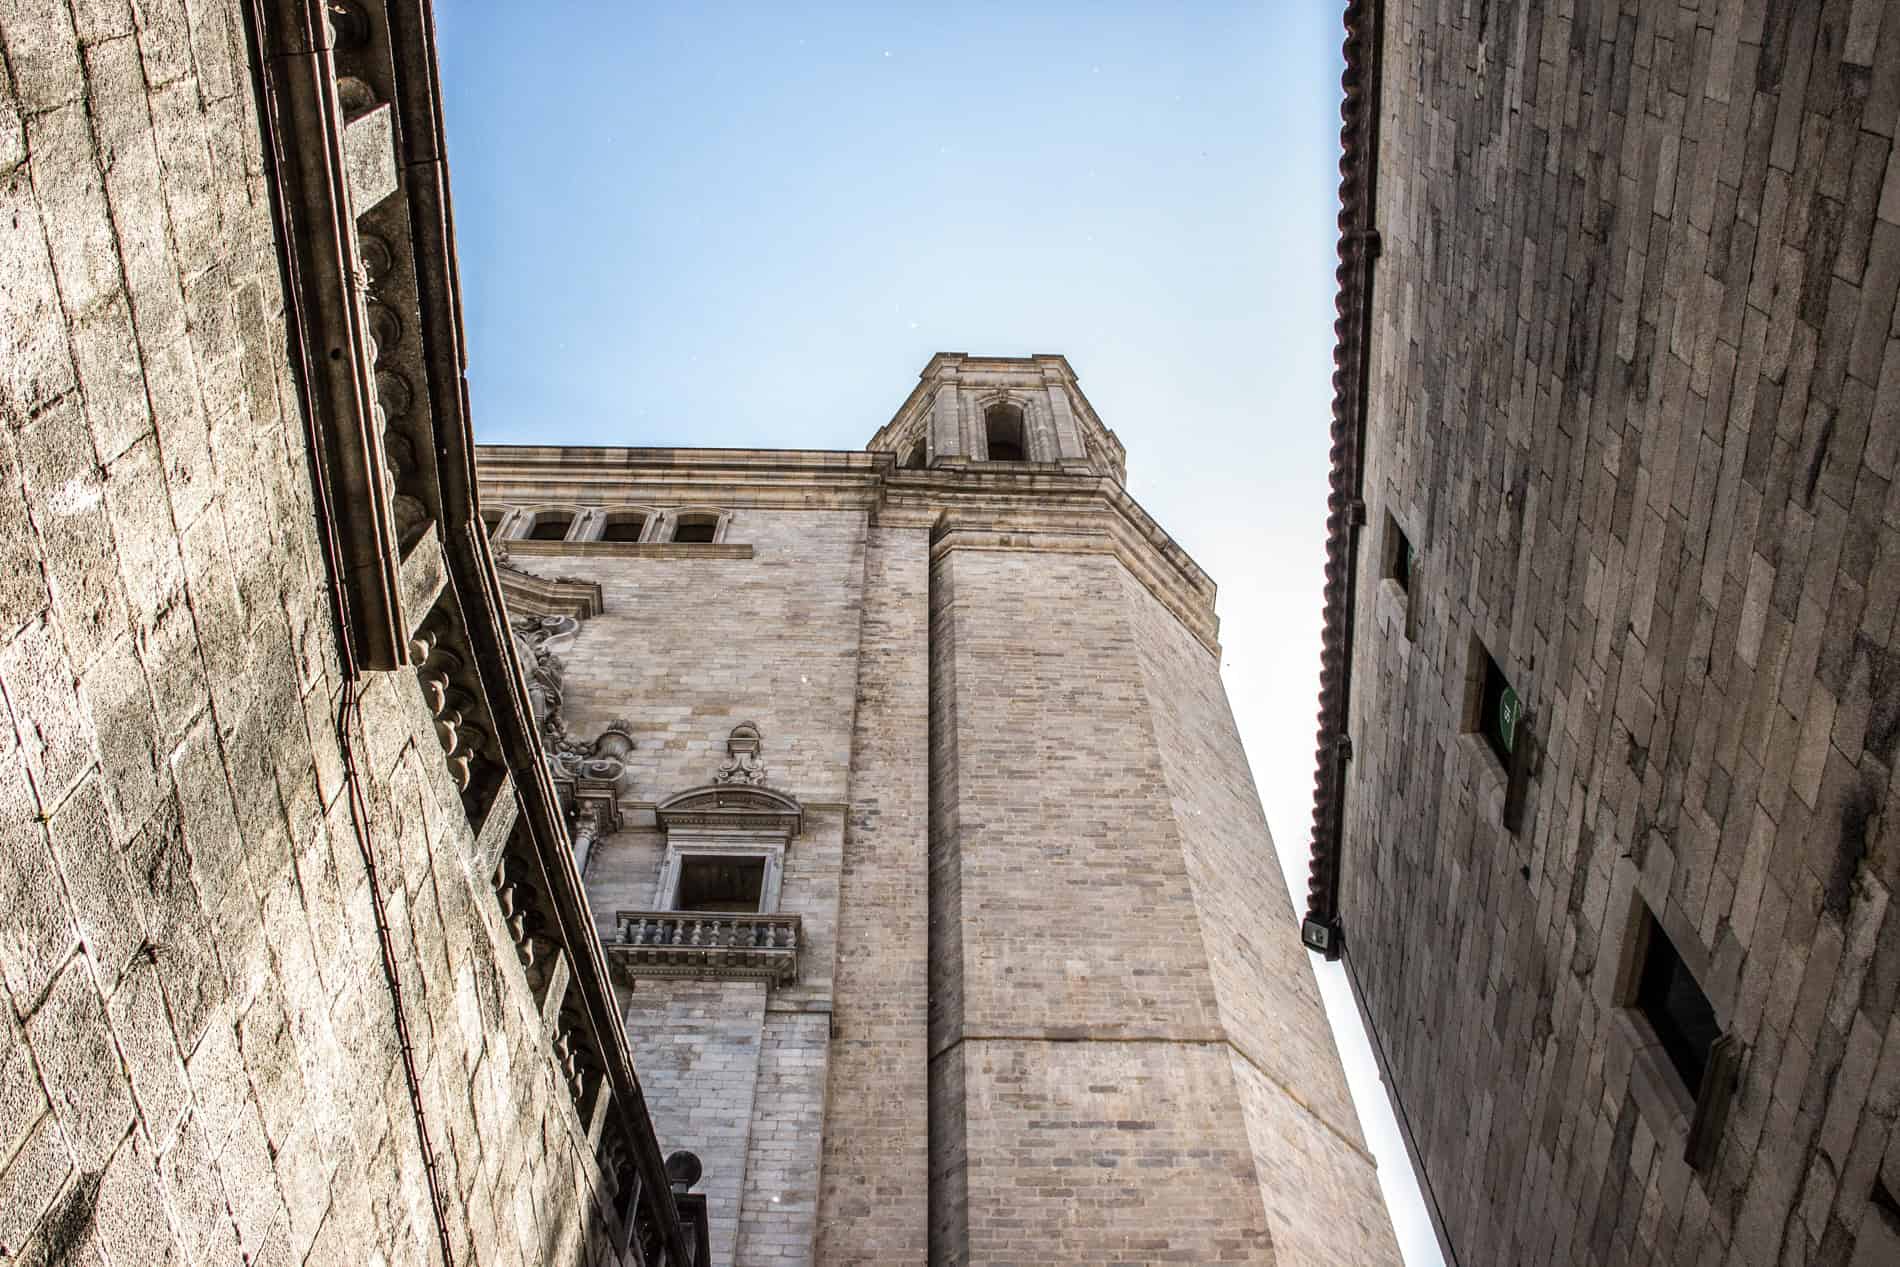 A view looking up to the high stone walls and ramparts of the Roman Força Vella Fortress in Girona, Spain. 